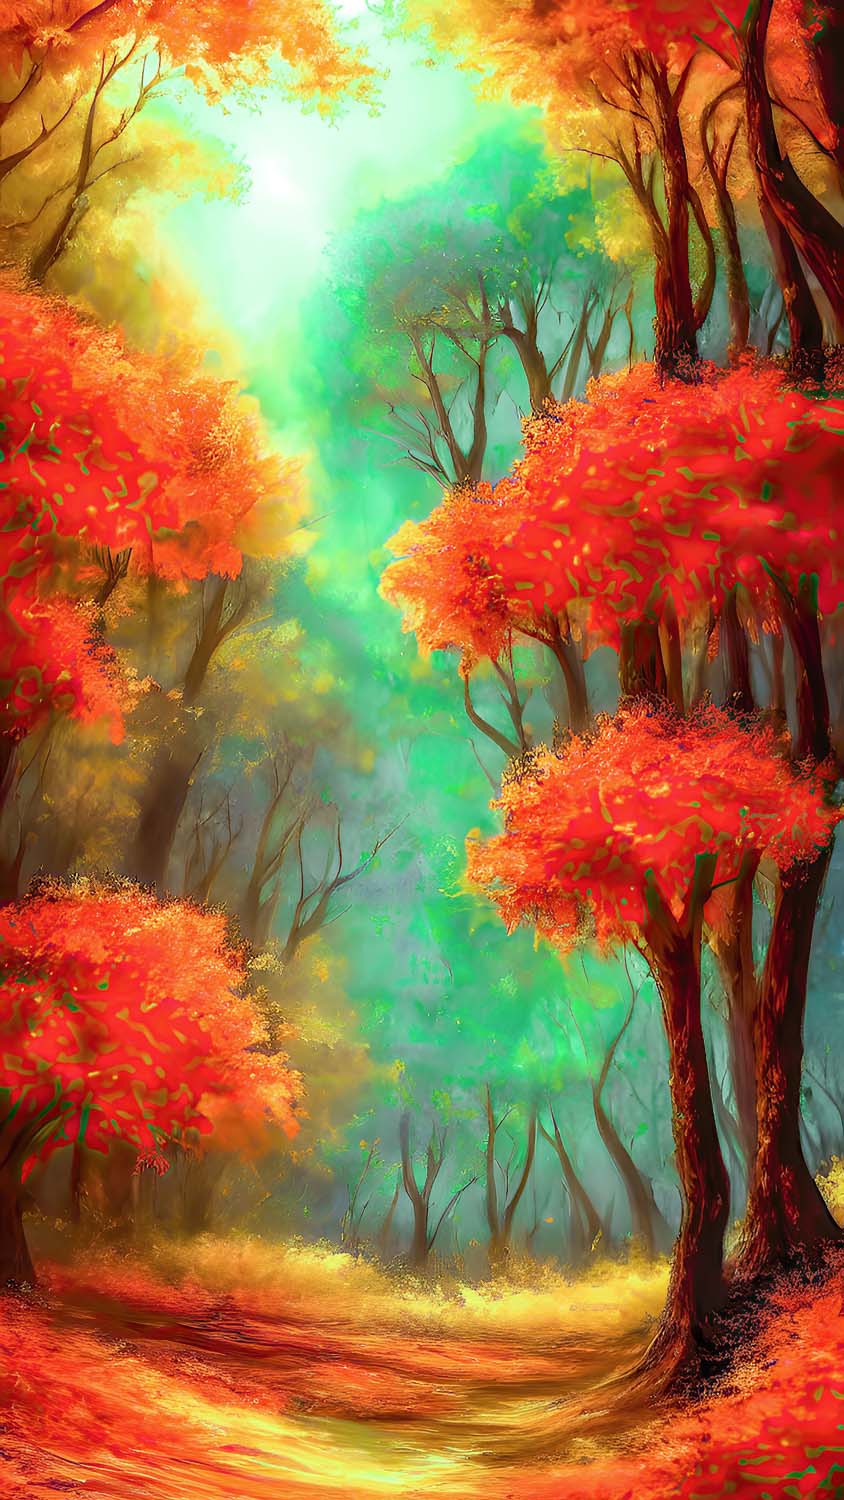 Autumn Forest Art Painting IPhone Wallpaper HD - IPhone Wallpapers : iPhone  Wallpapers